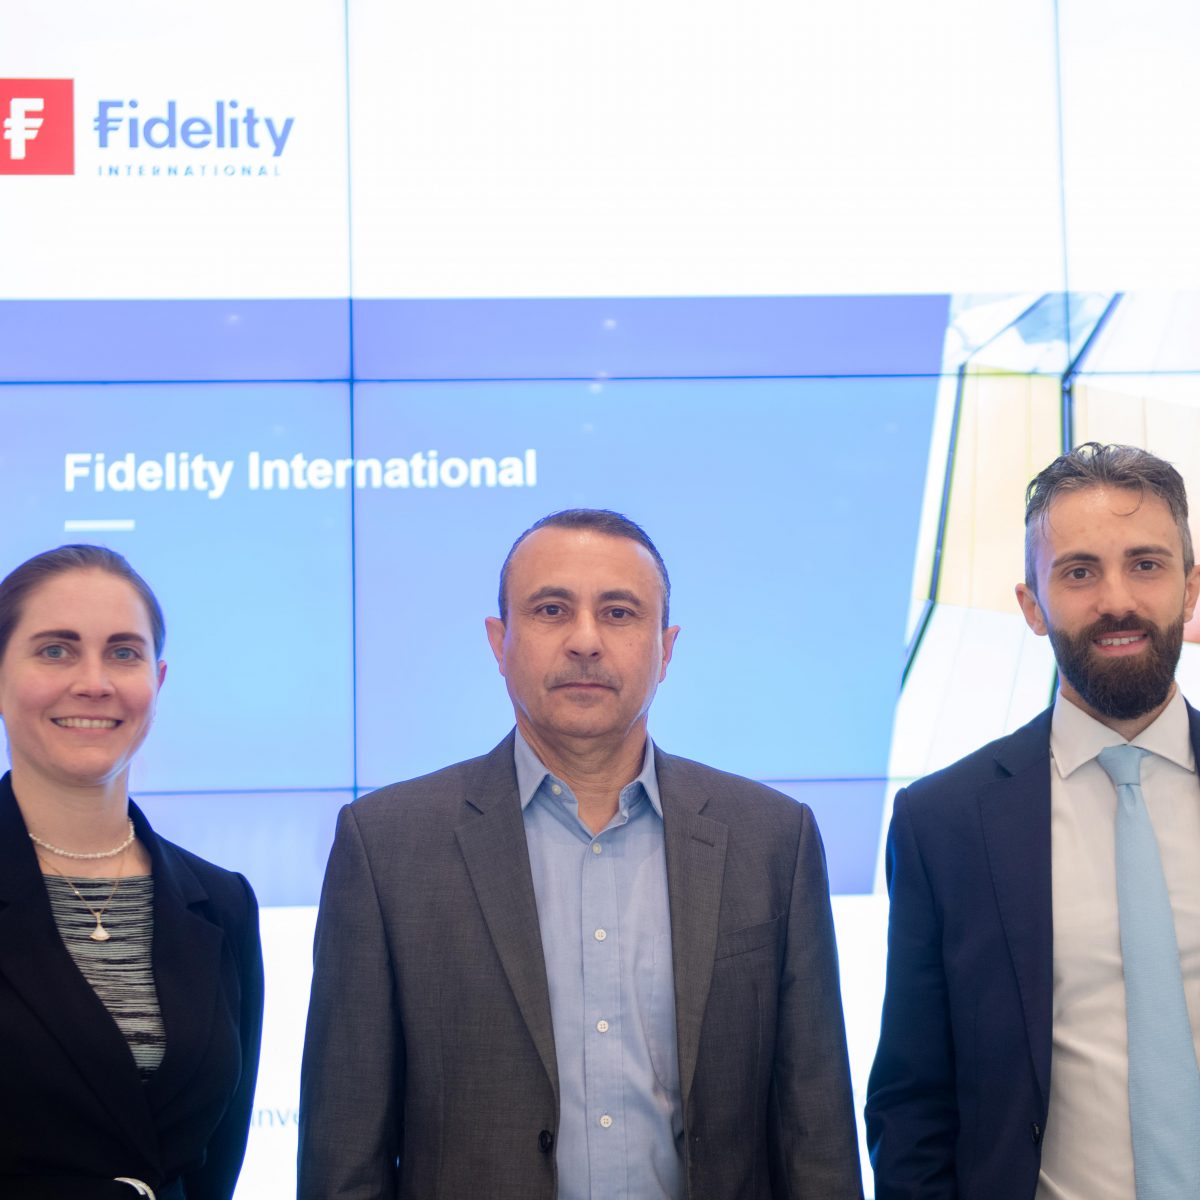 BOV Asset Management Limited launches the Global Multi-Asset Thematic 60 Fund managed by Fidelity International